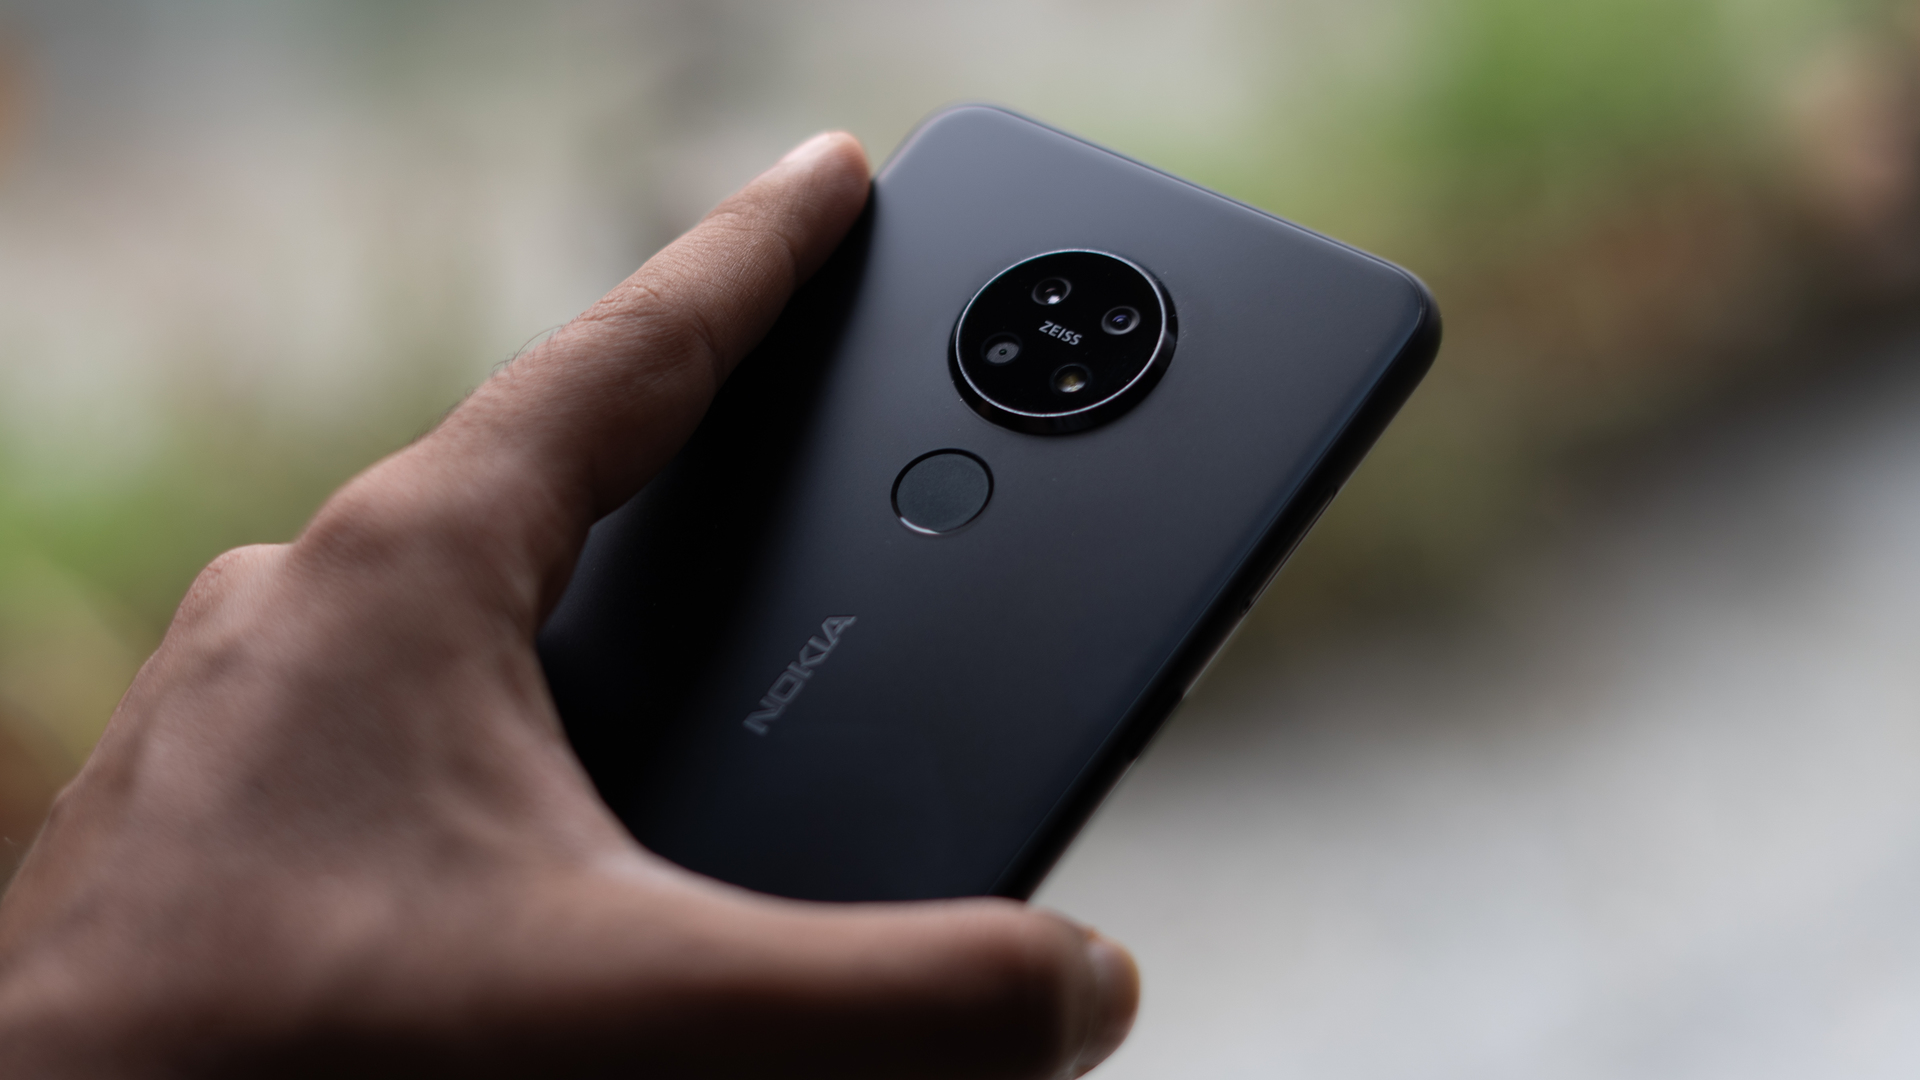 Nokia 7.2 showing camera module in hand